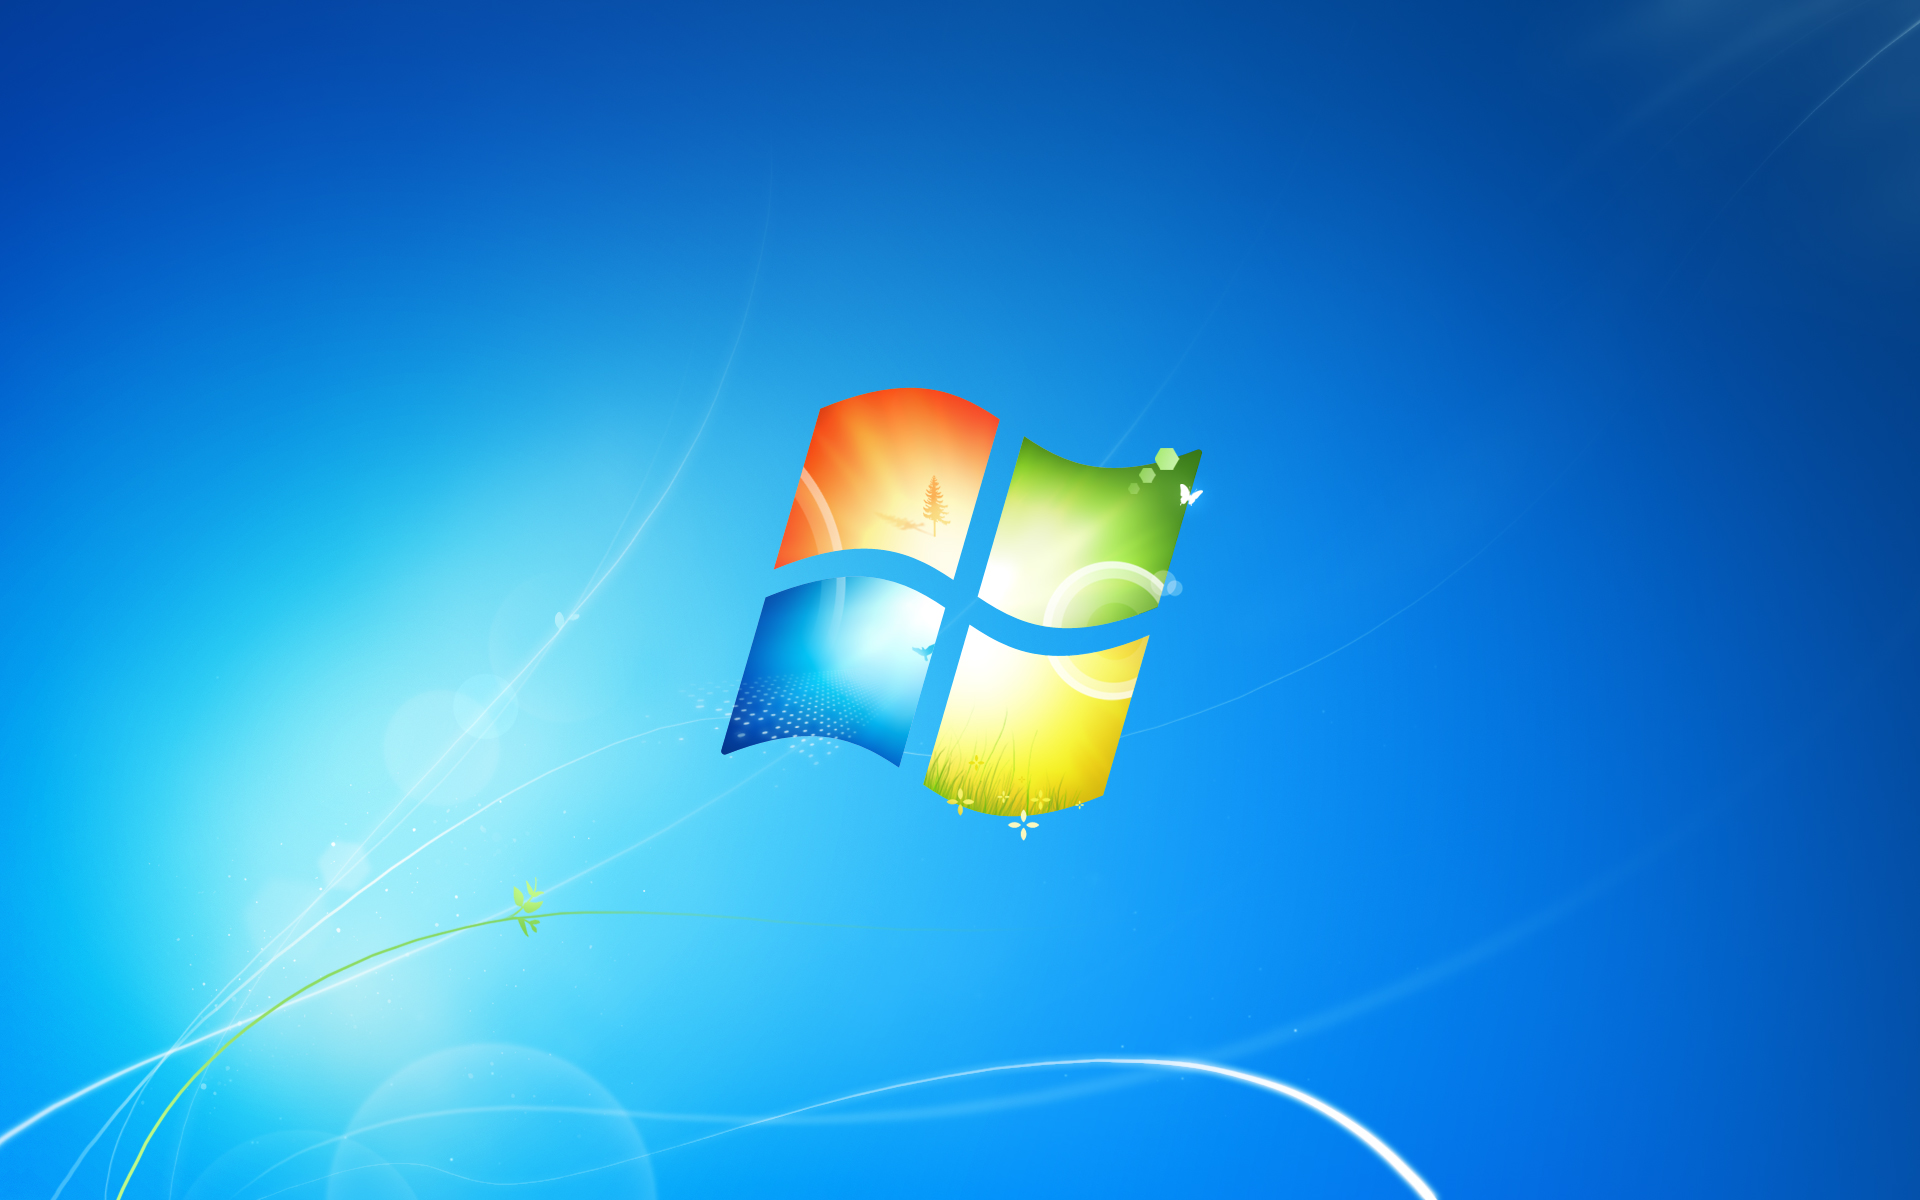 And Not Only I Have Posted This Classic Windows Wallpaper